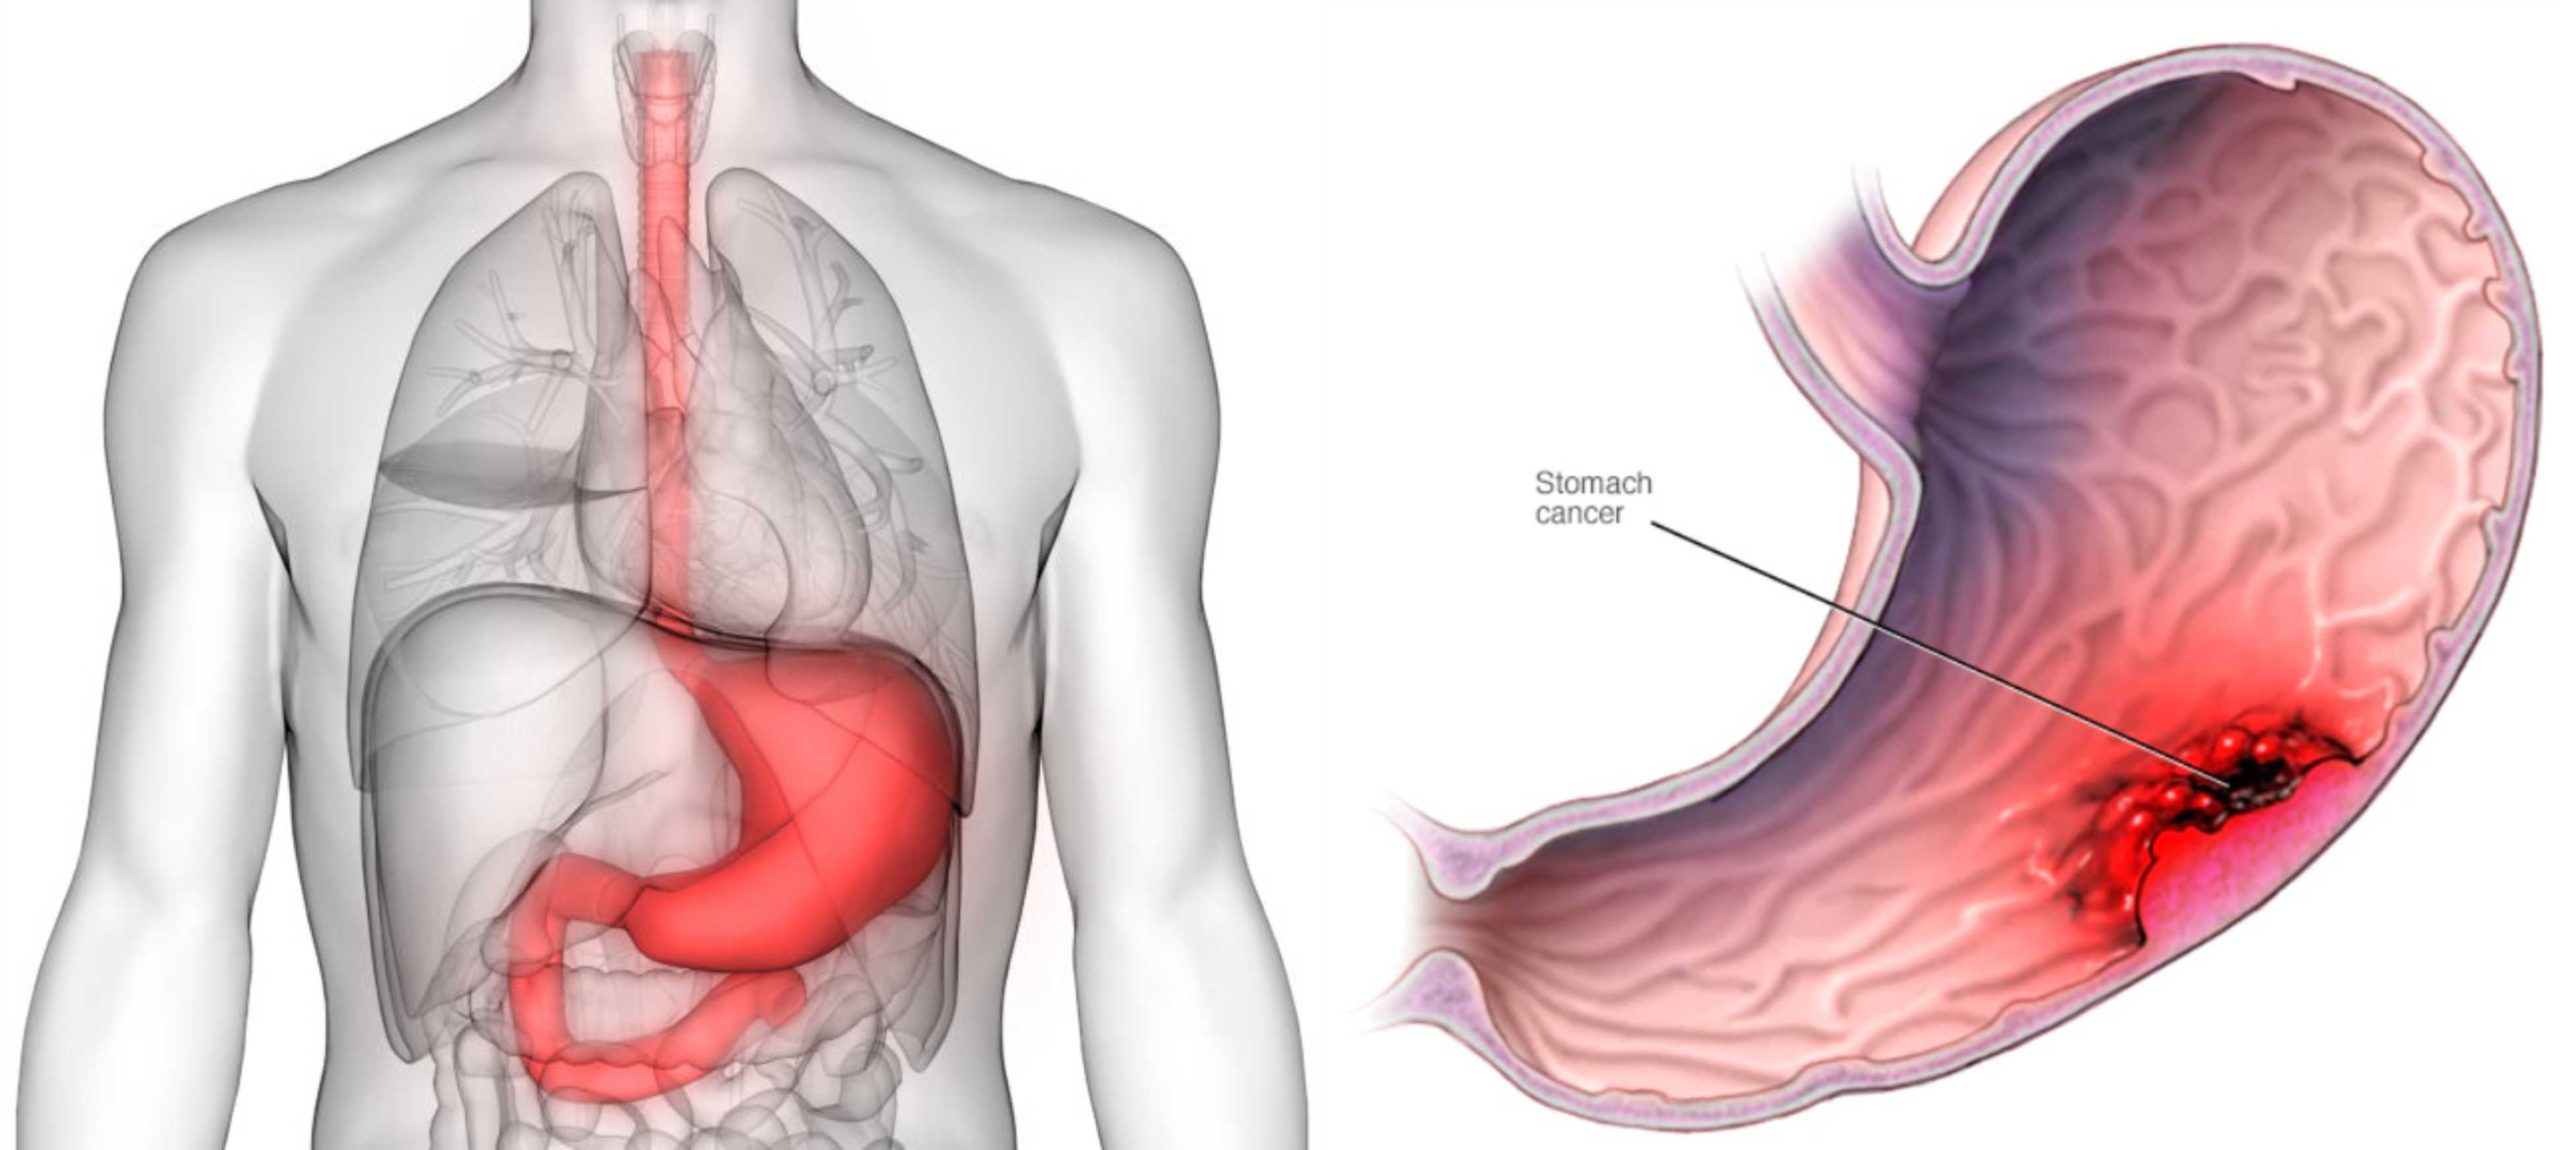 Stomach Cancer? What you need to know!